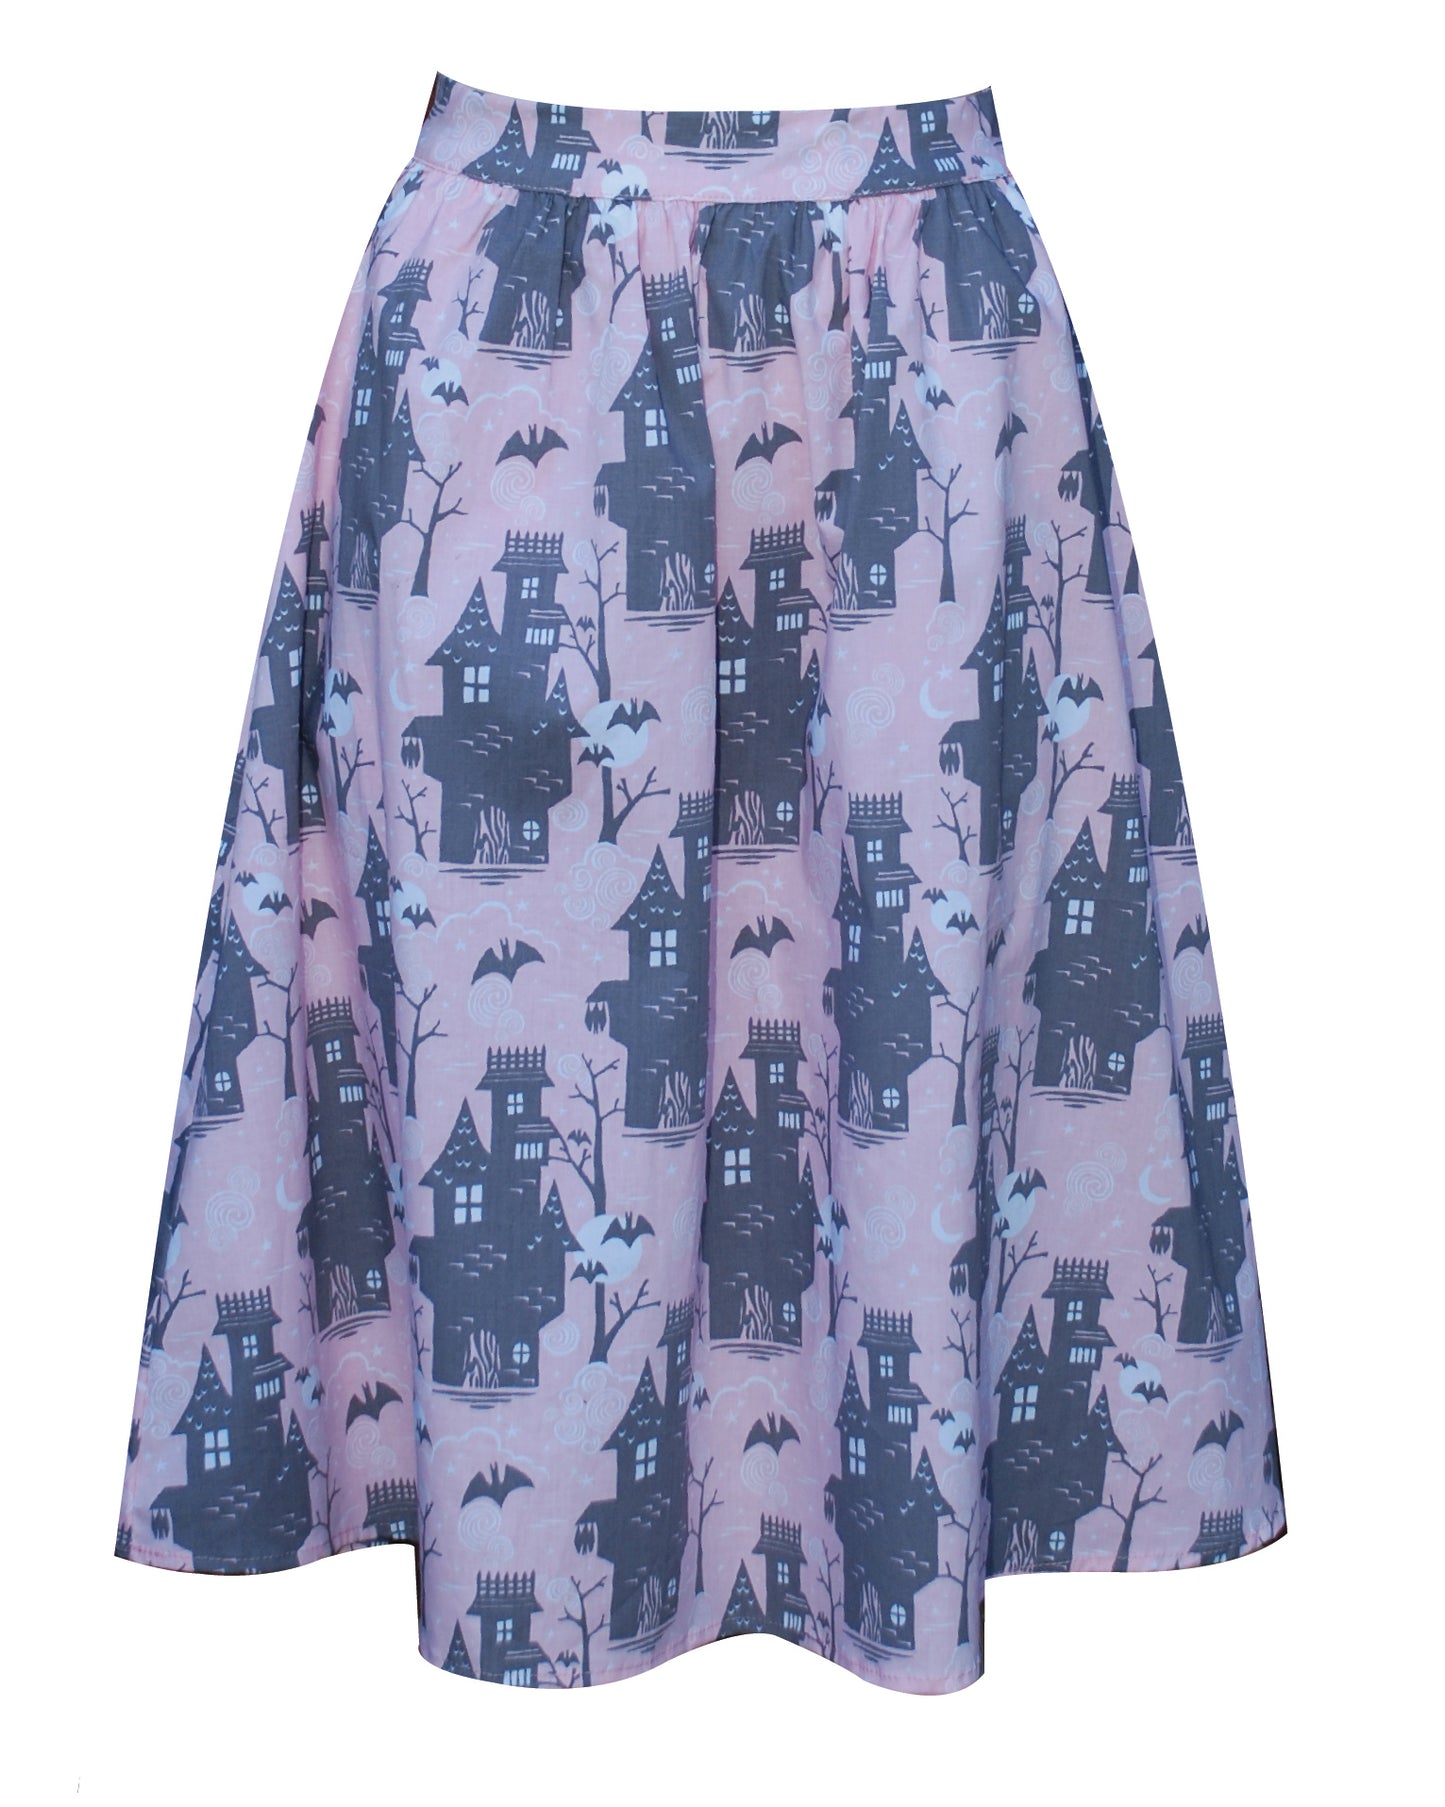 Pink and grey gathered midi skirt with haunted houses, moons and bats